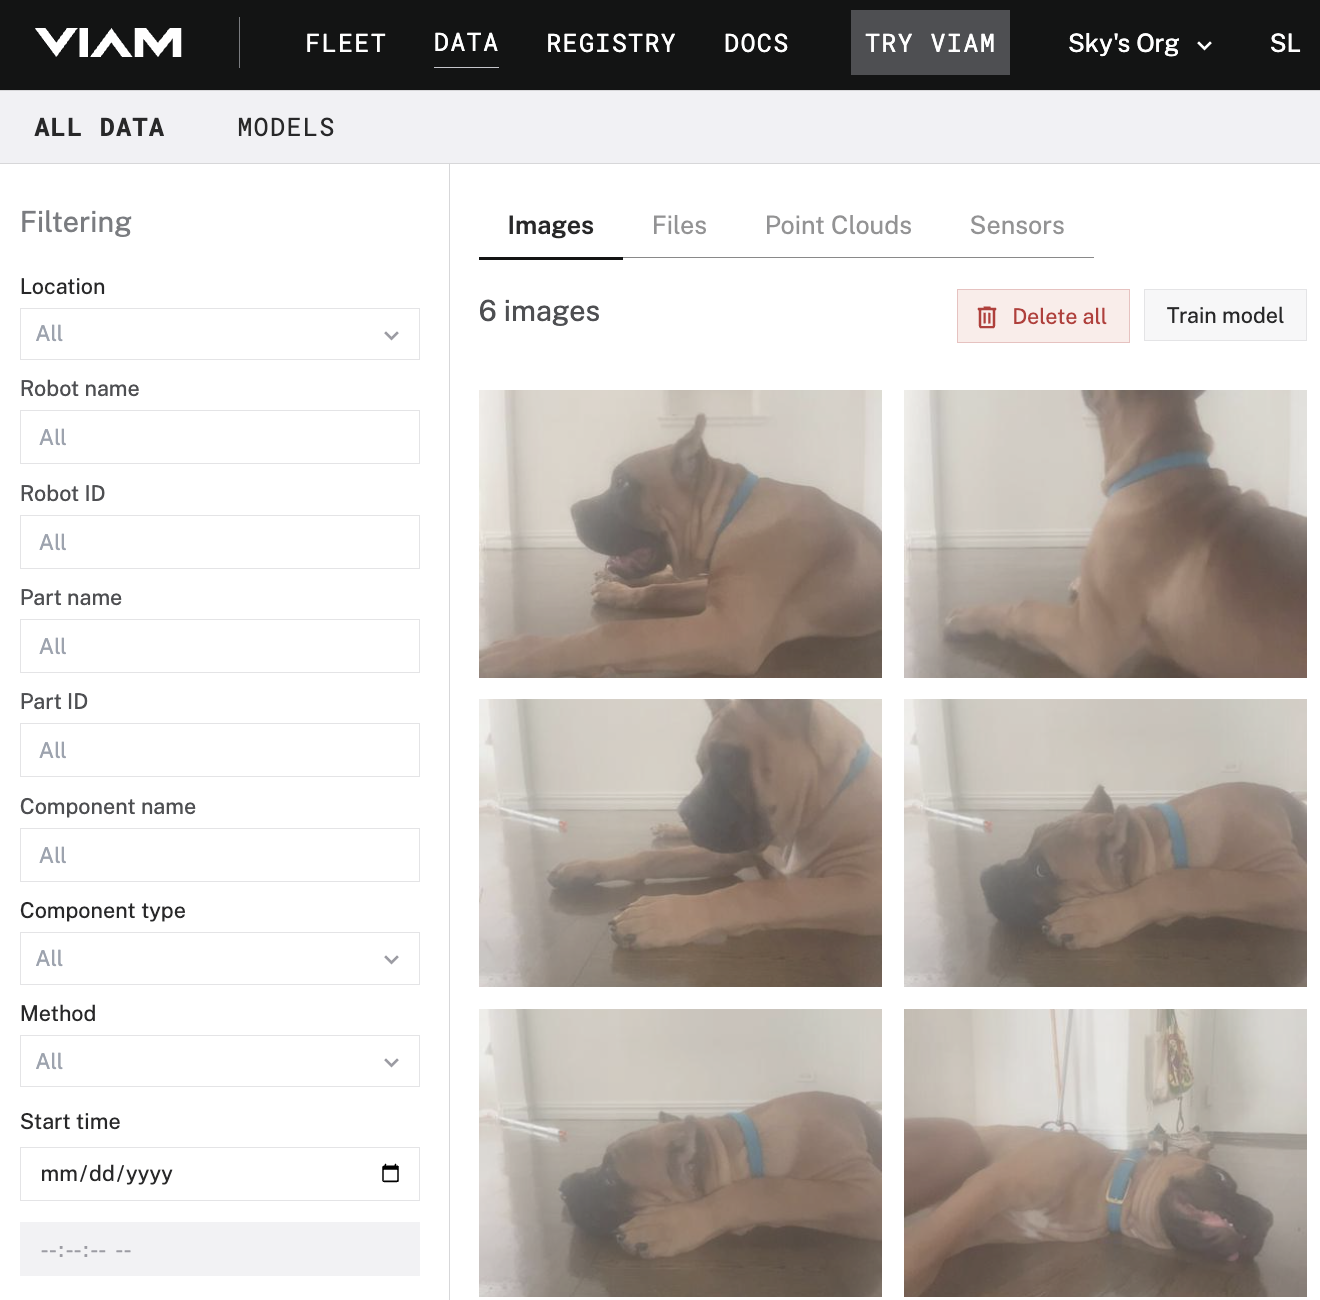 Filtered data tab contents from the colorfiltercam component showing only photos of a dog with a blue collar